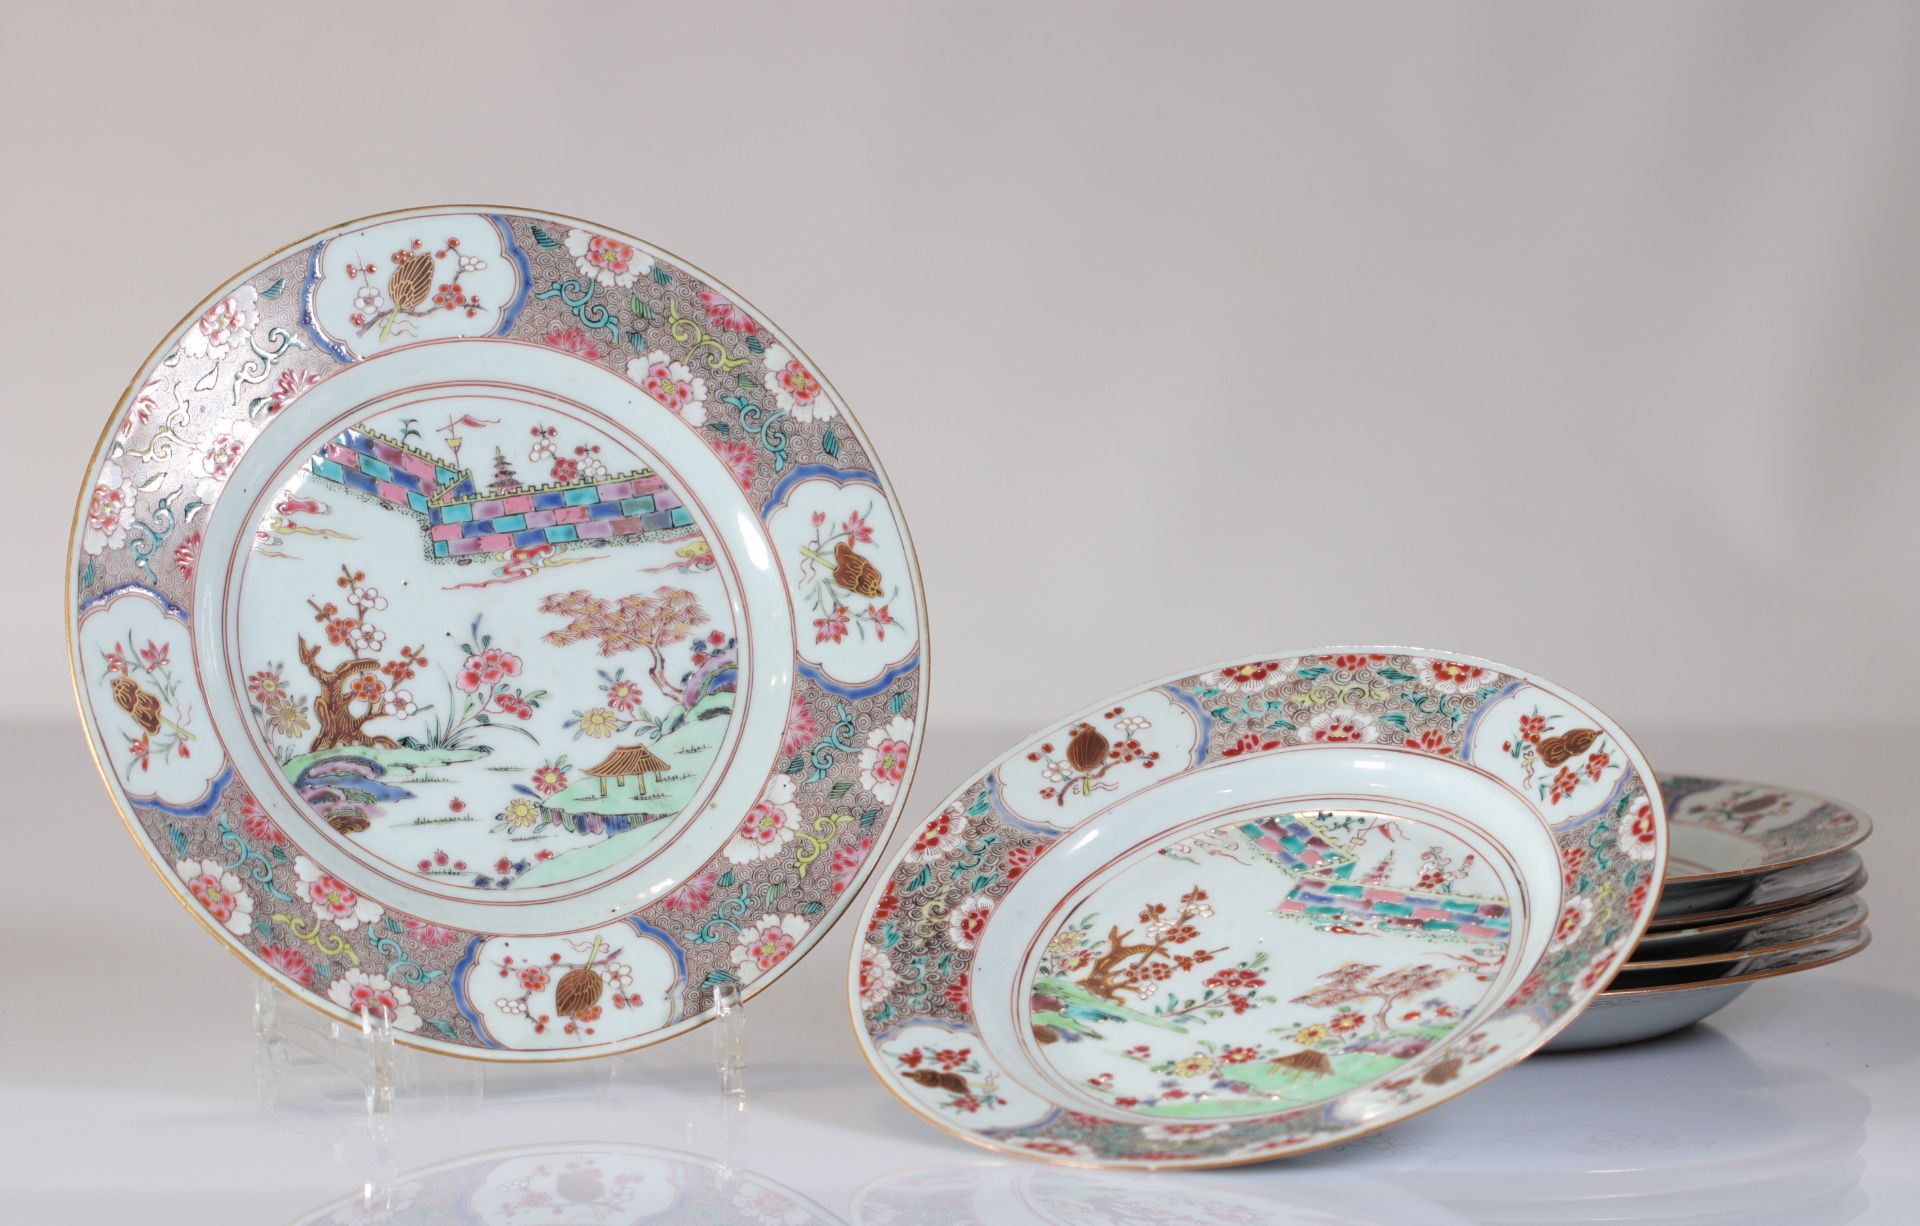 Series of 6 porcelain plates from the 18th century famille rose landscape decor